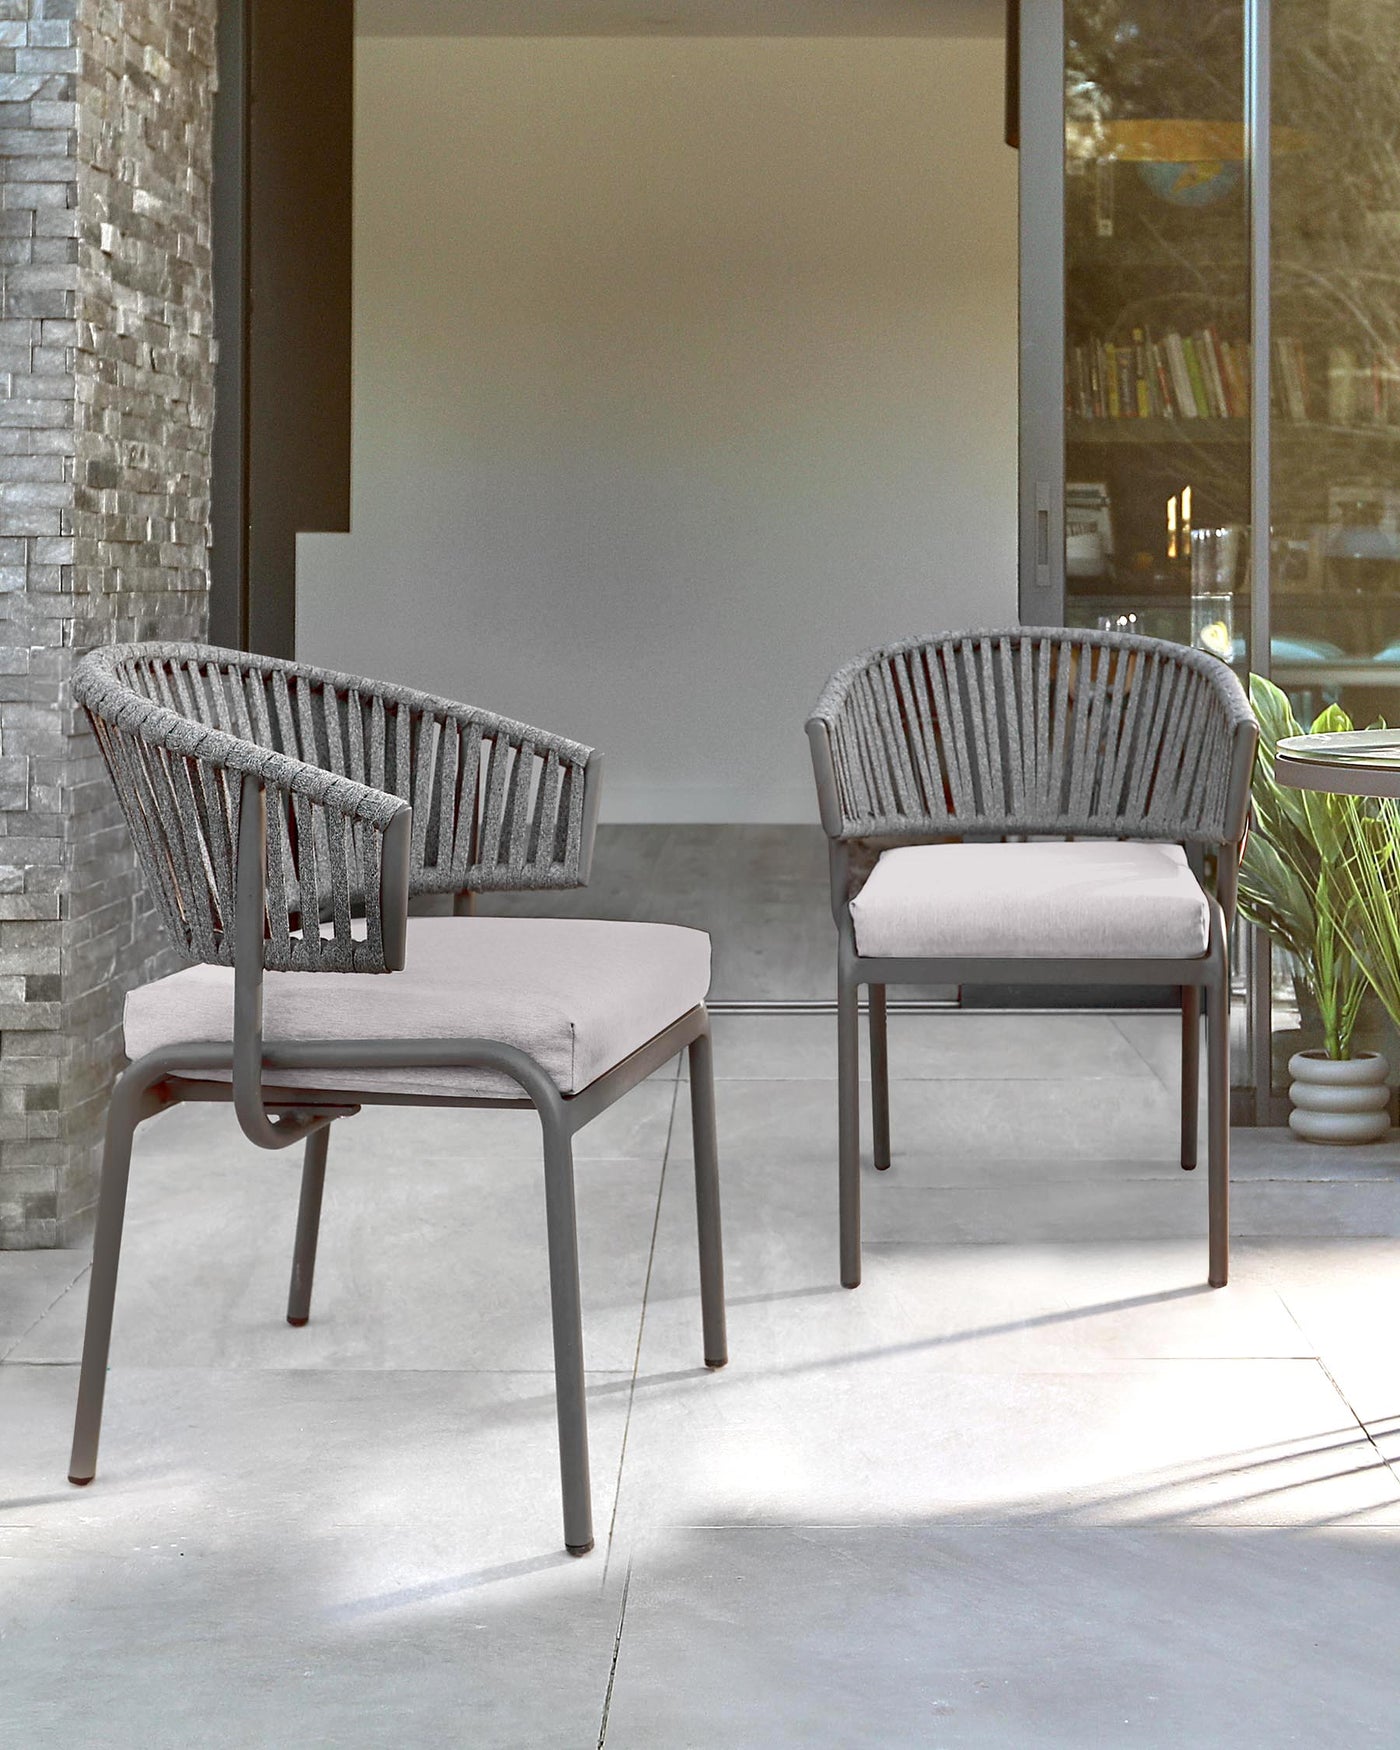 Two contemporary outdoor chairs with a minimalist design, featuring a matte metallic frame and vertical cordage backrest, complemented by smooth, light-coloured seat cushions. The chairs are set on an outdoor patio area, suggesting a modern and stylish outdoor living space.